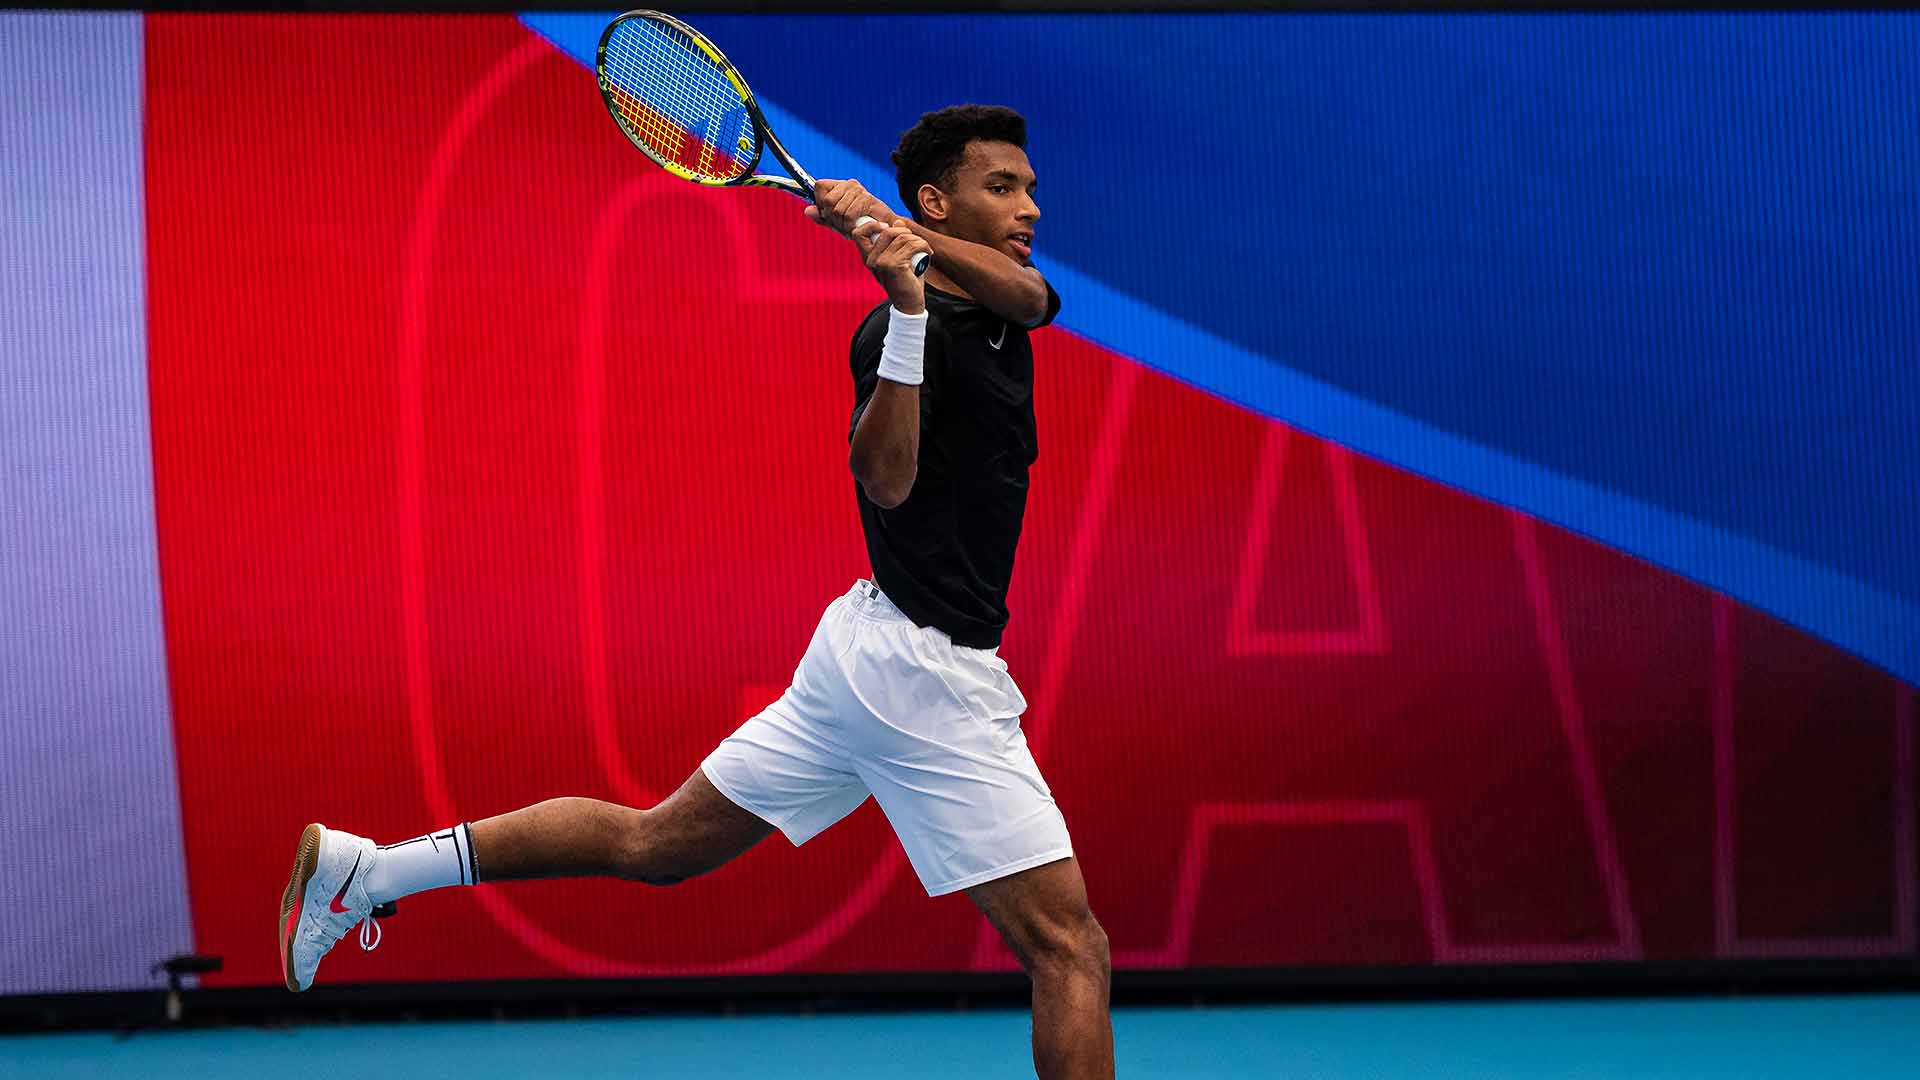 Felix Auger-Aliassime and Canada will kick off the inaugural ATP Cup in Brisbane on Friday morning.